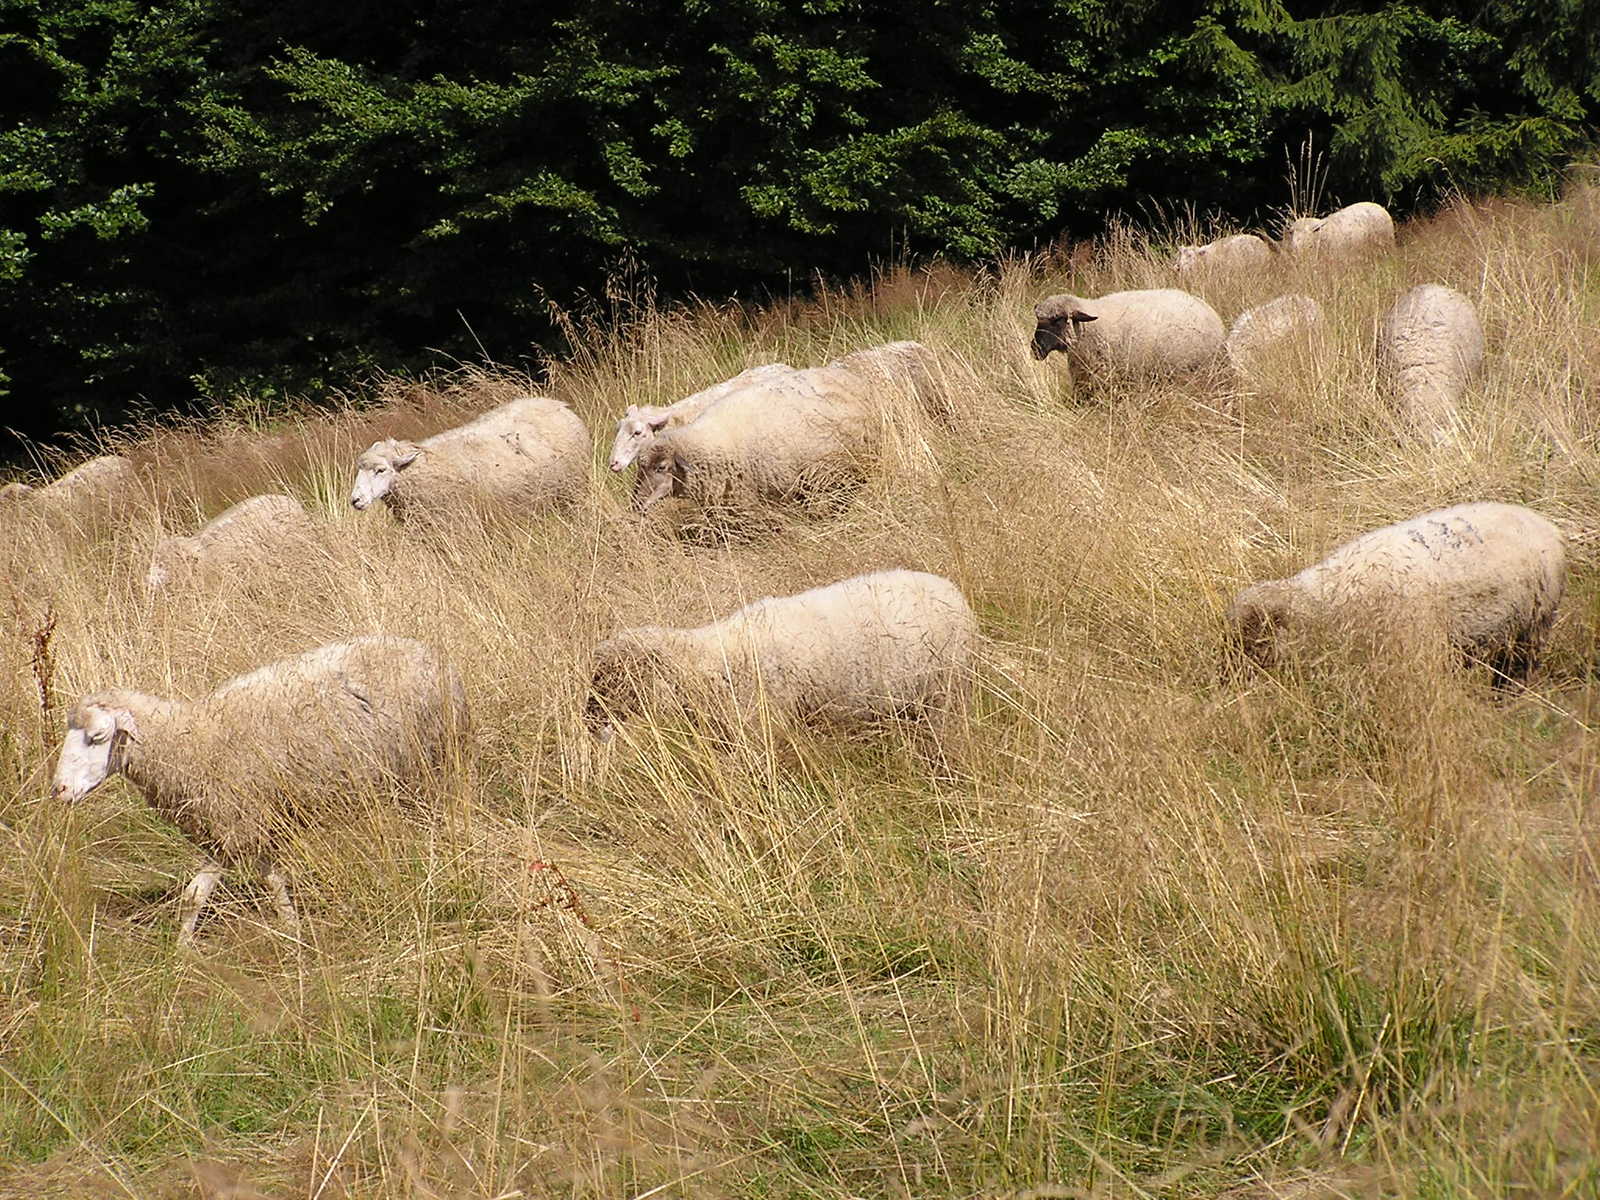 many sheep stand in long grass beside some trees